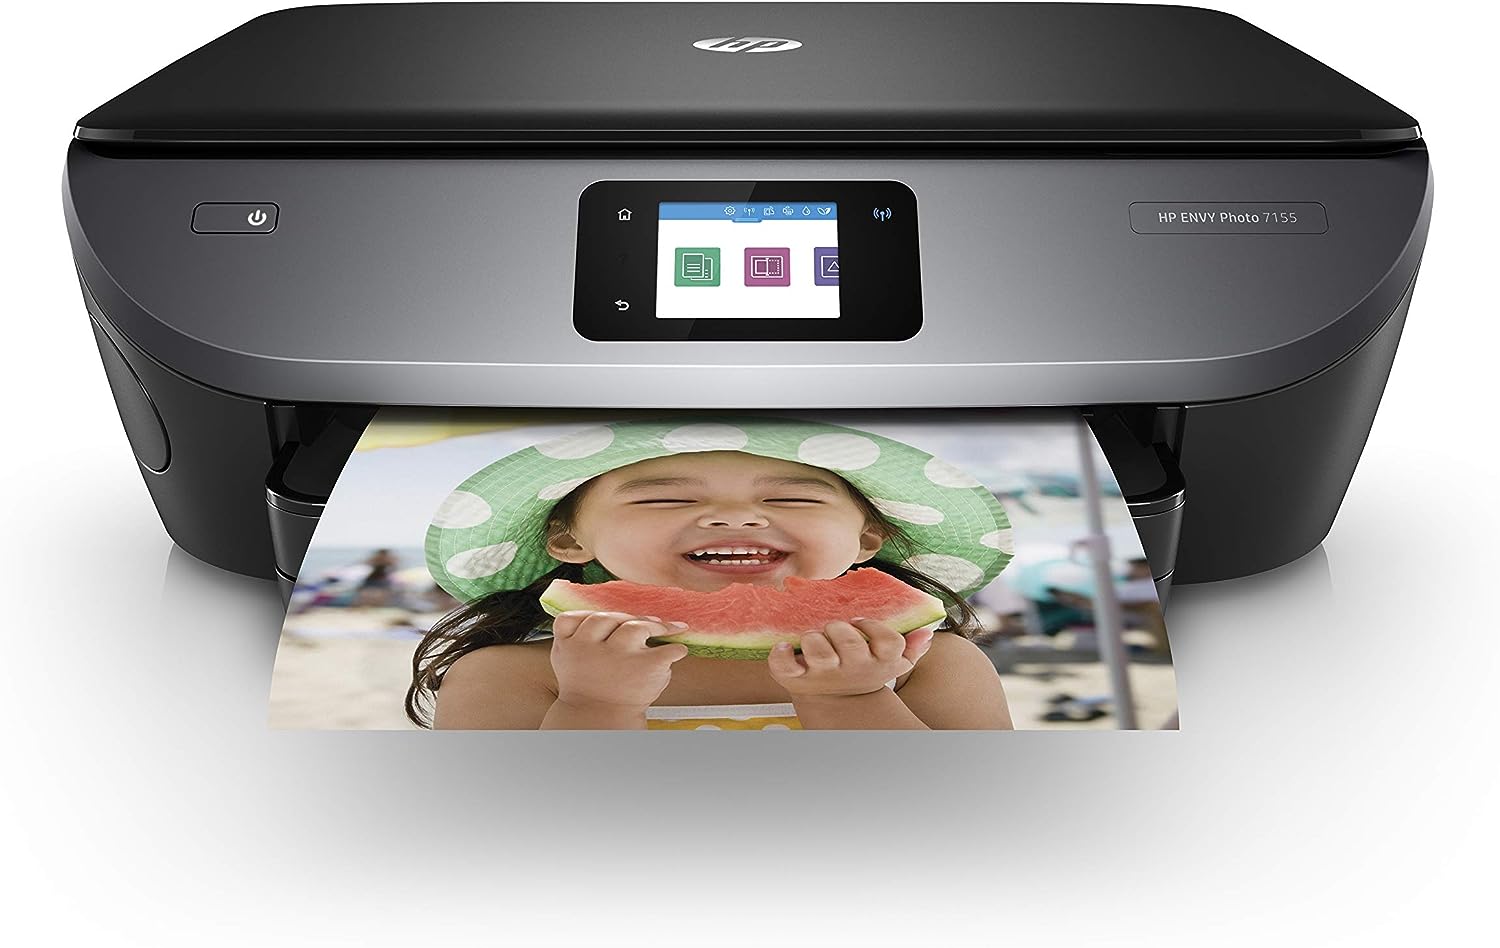 HP Envy Photo 7155 Wireless Printer for Crafting